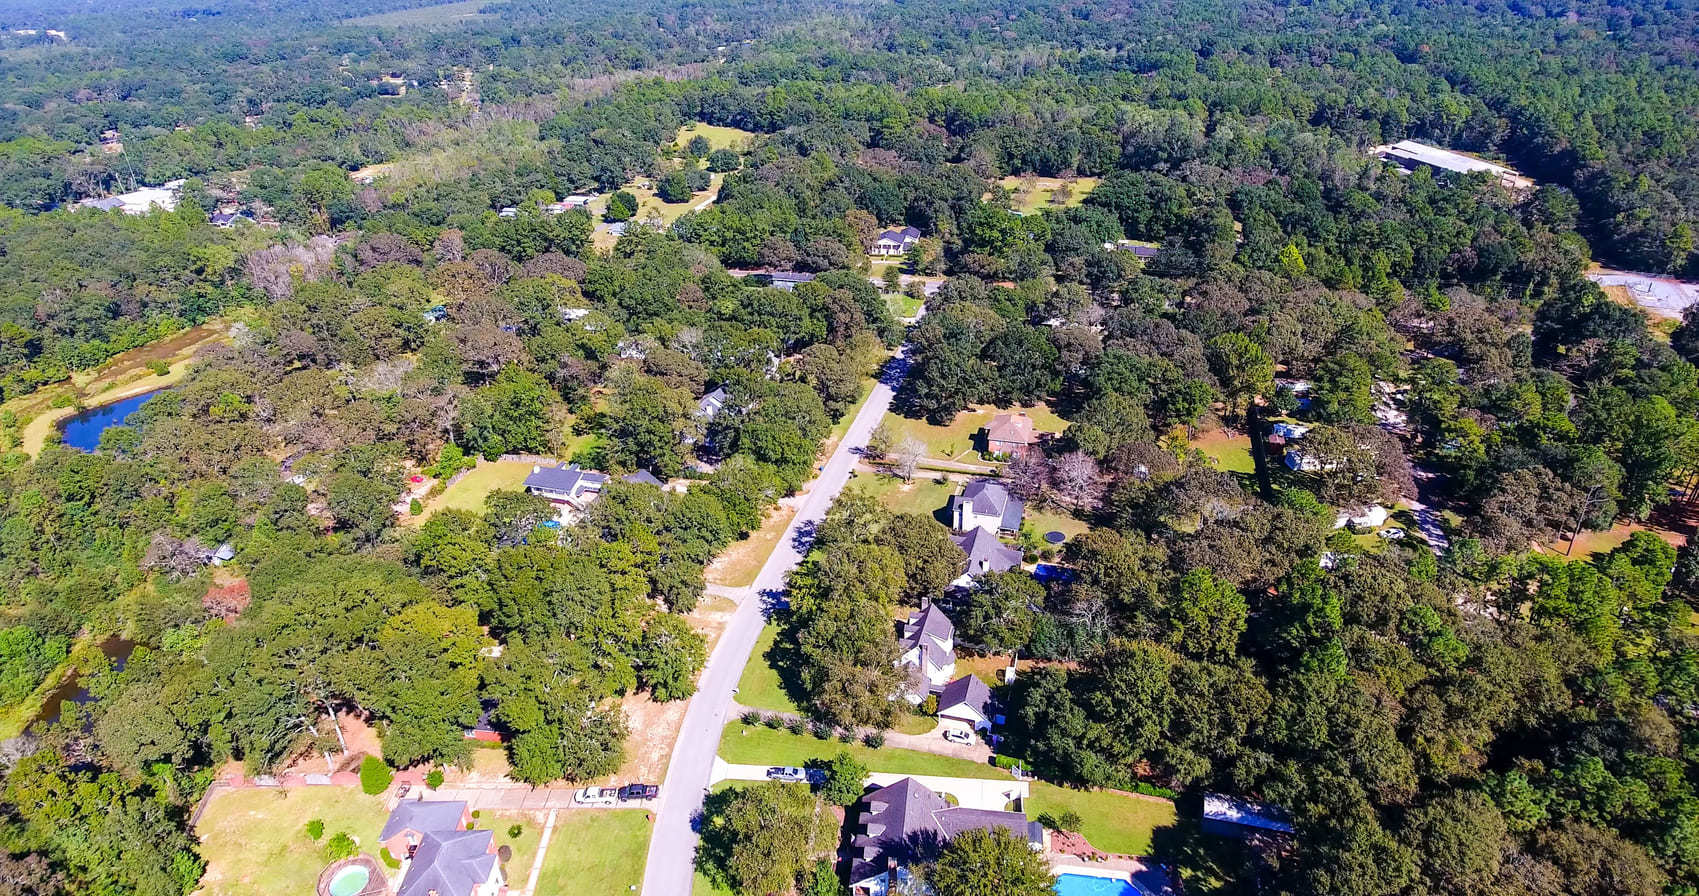 An overhead view of Meridianville, Alabama